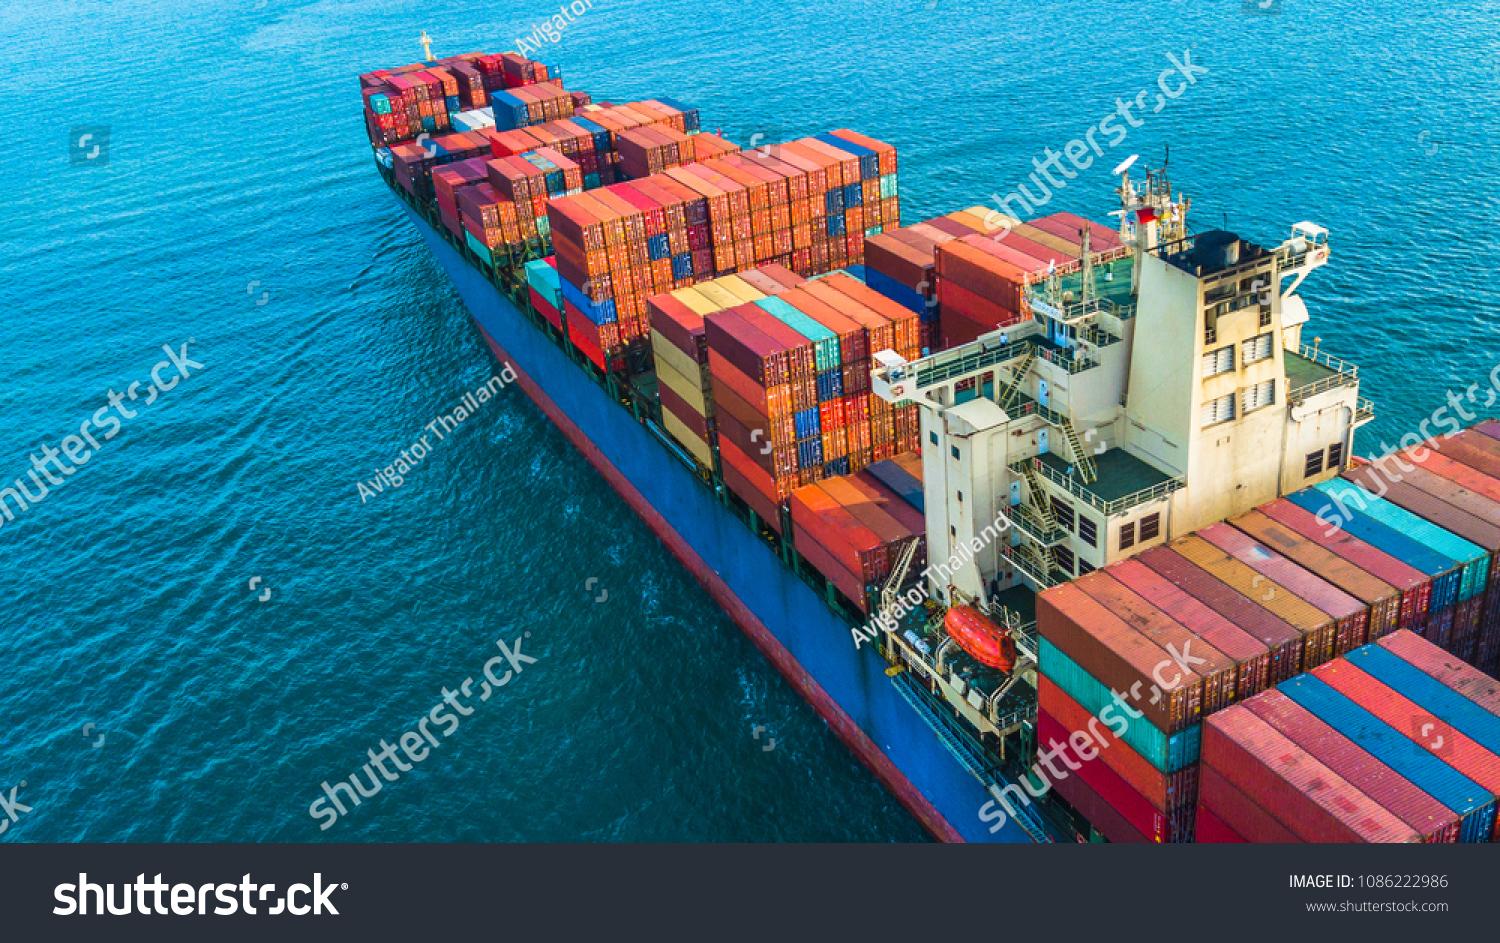 Container ship, Aerial view business logistic and transportation of International by container ship in the open sea. #1086222986